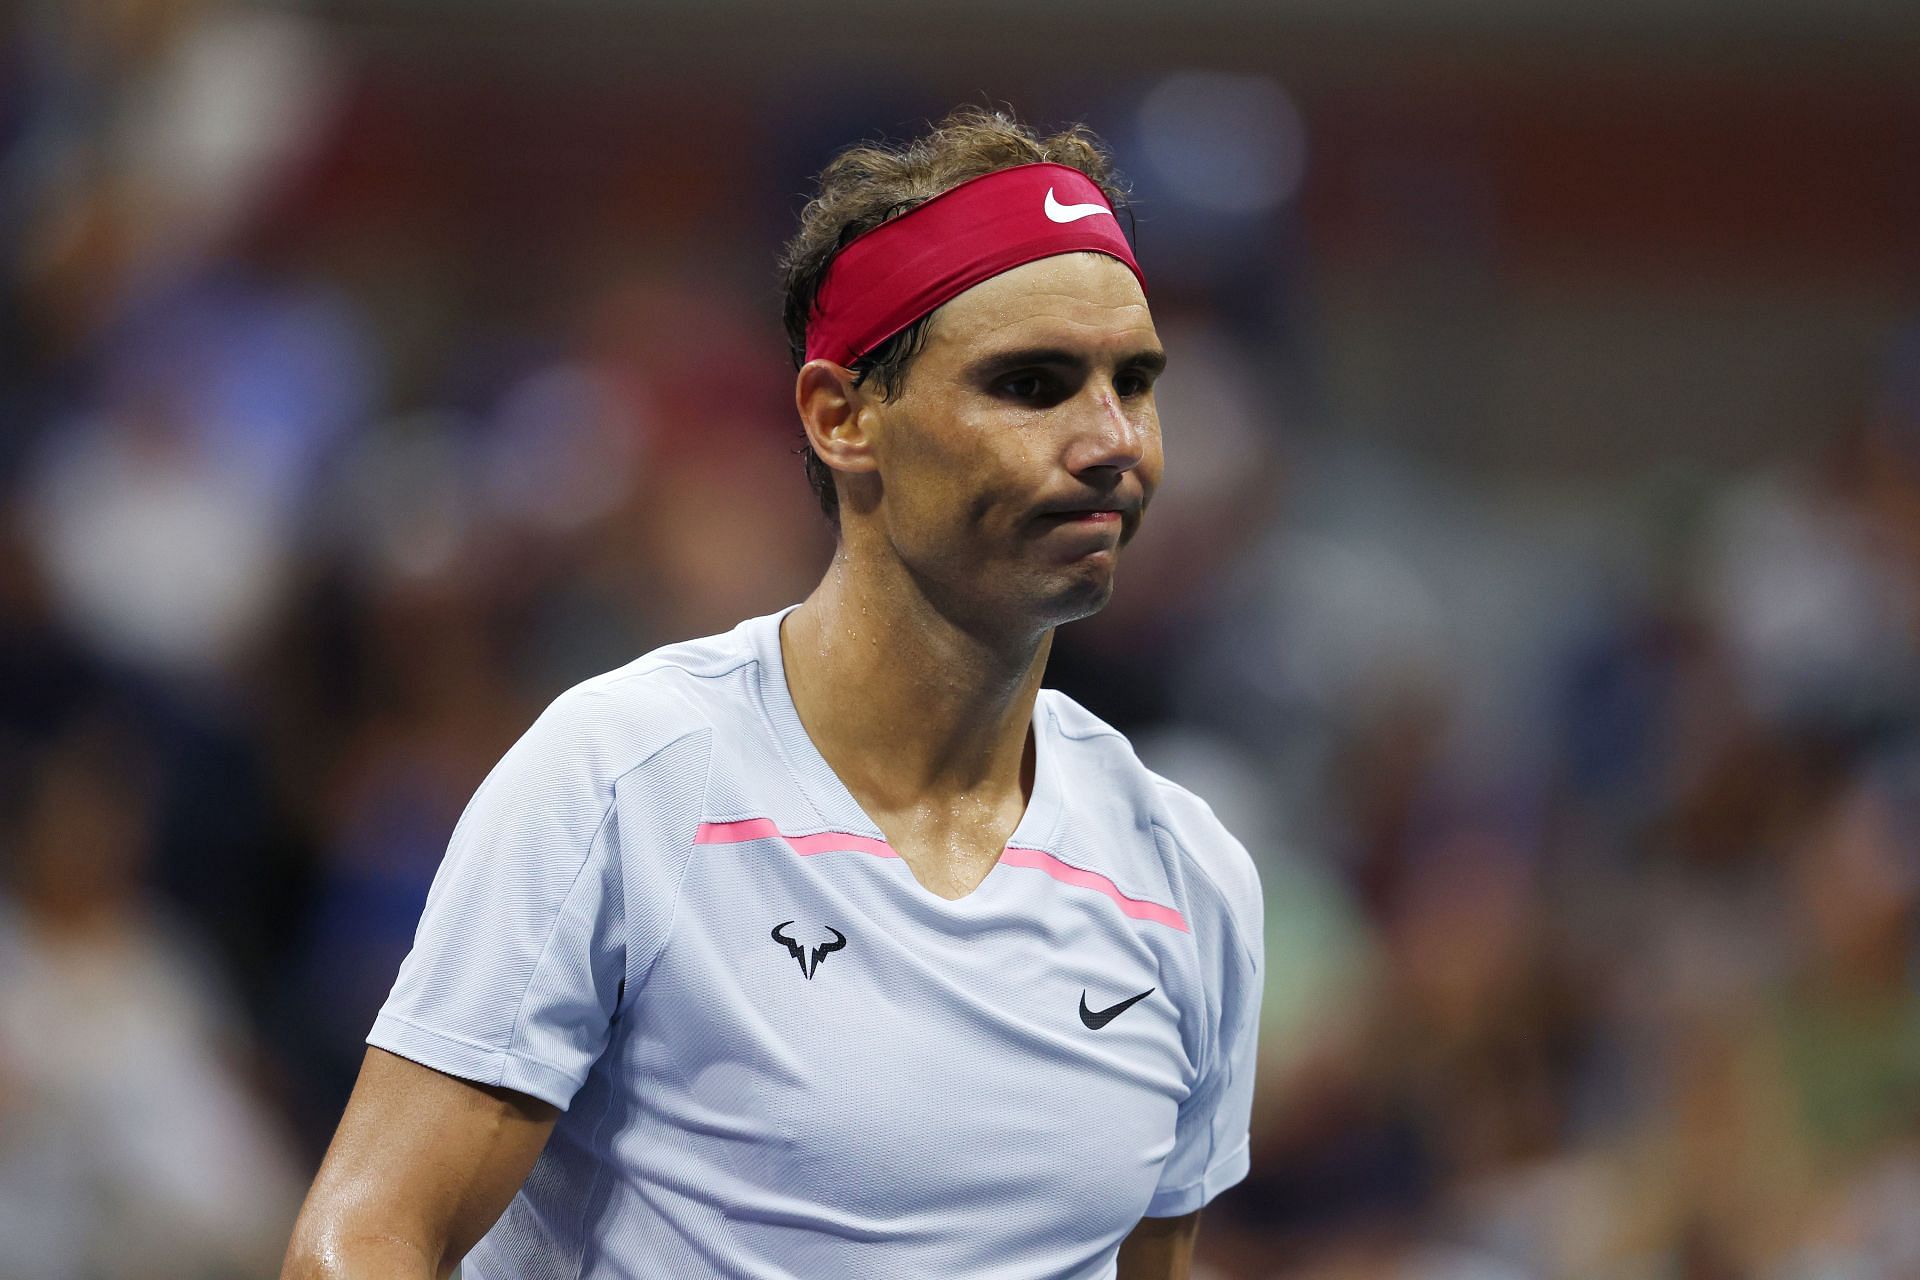 Rafael Nadal at the 2022 US Open - Day 8